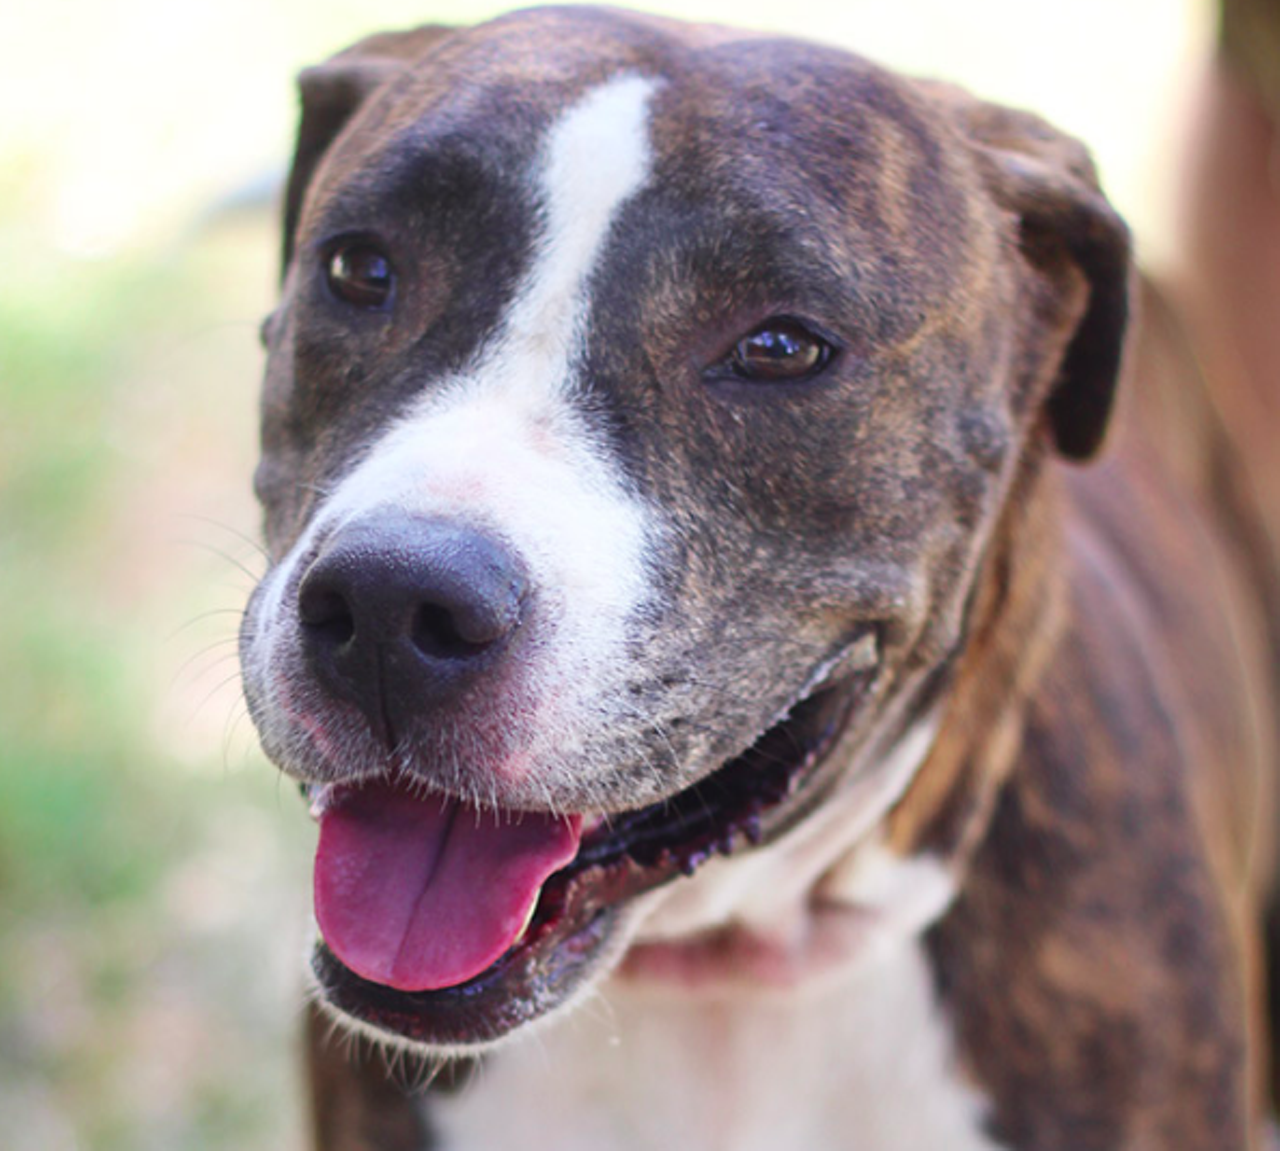 Jenga
"I’m a happy-go-lucky girl who wants to meet you! I love to give love and am a huge fans of treats. I walk pretty well on a leash, so why don’t you take me out and see my skills!"